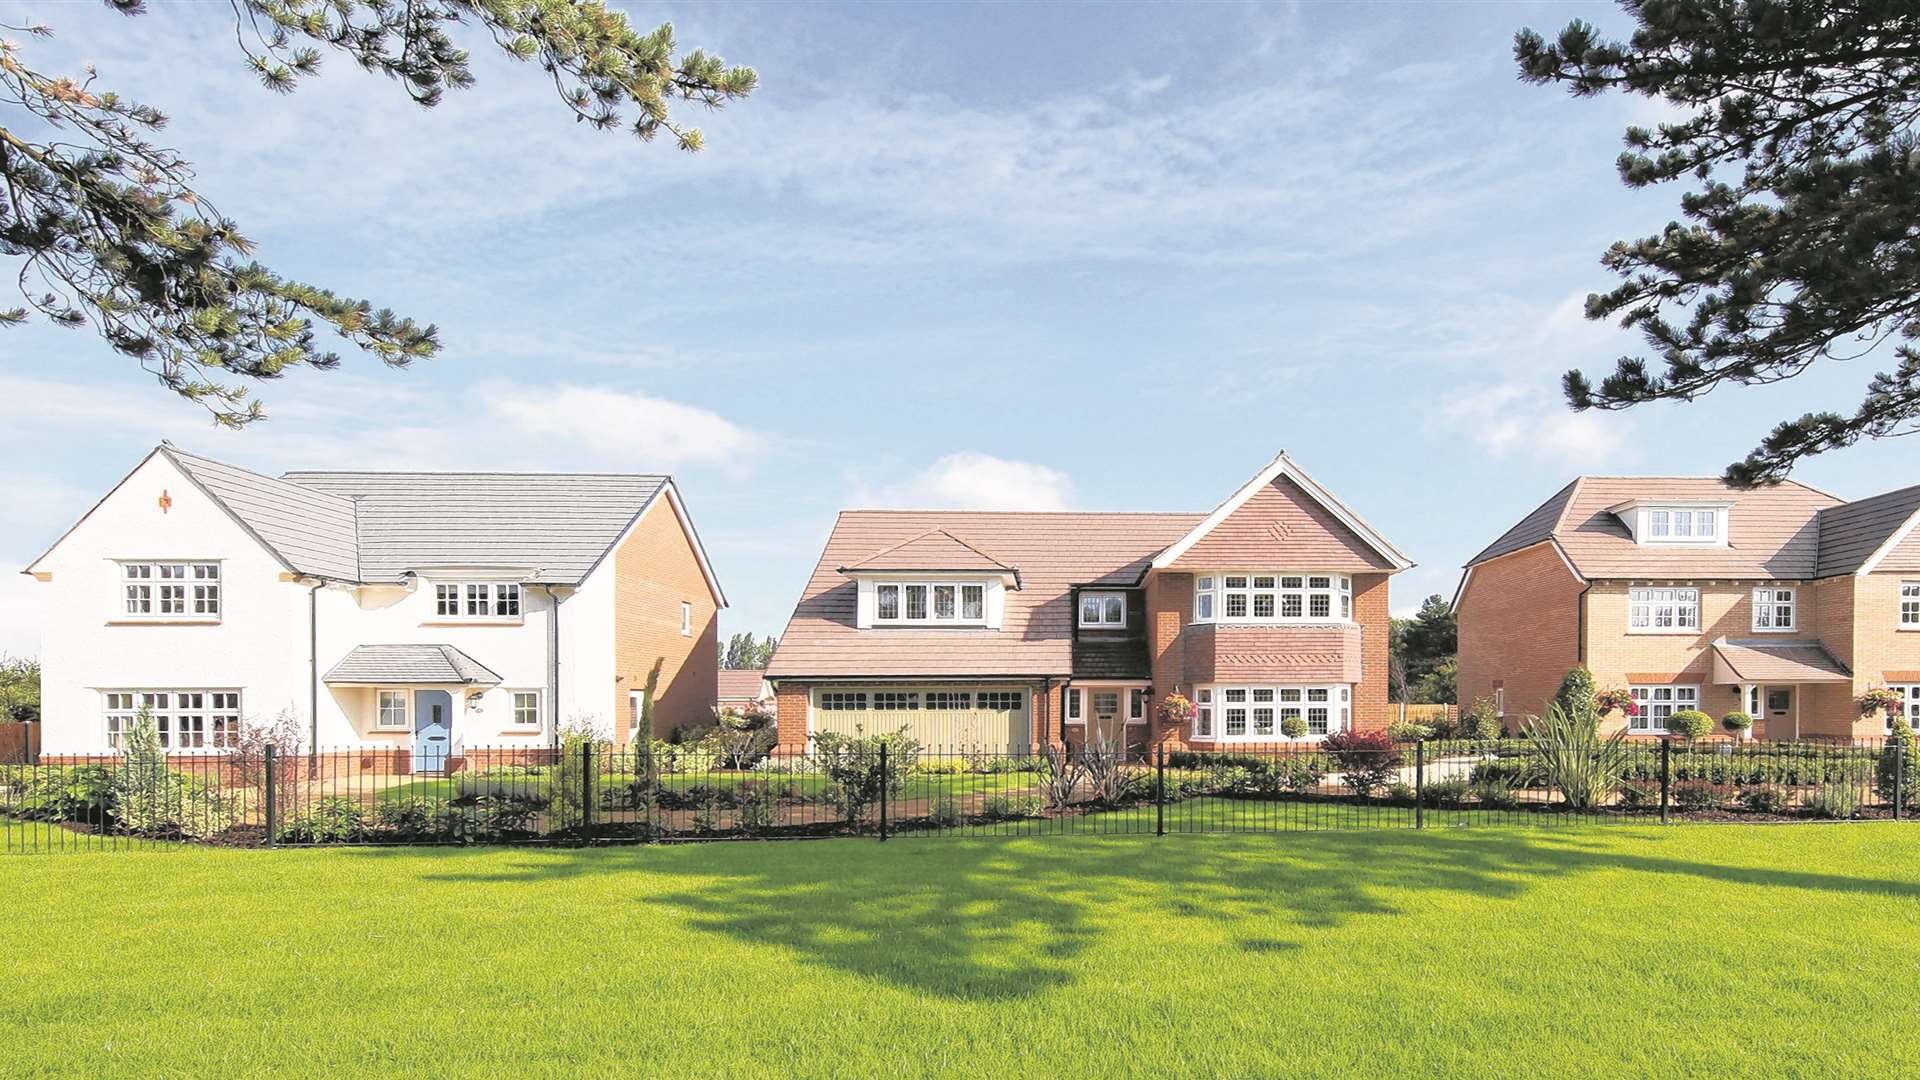 Homes typical of a Redrow development.